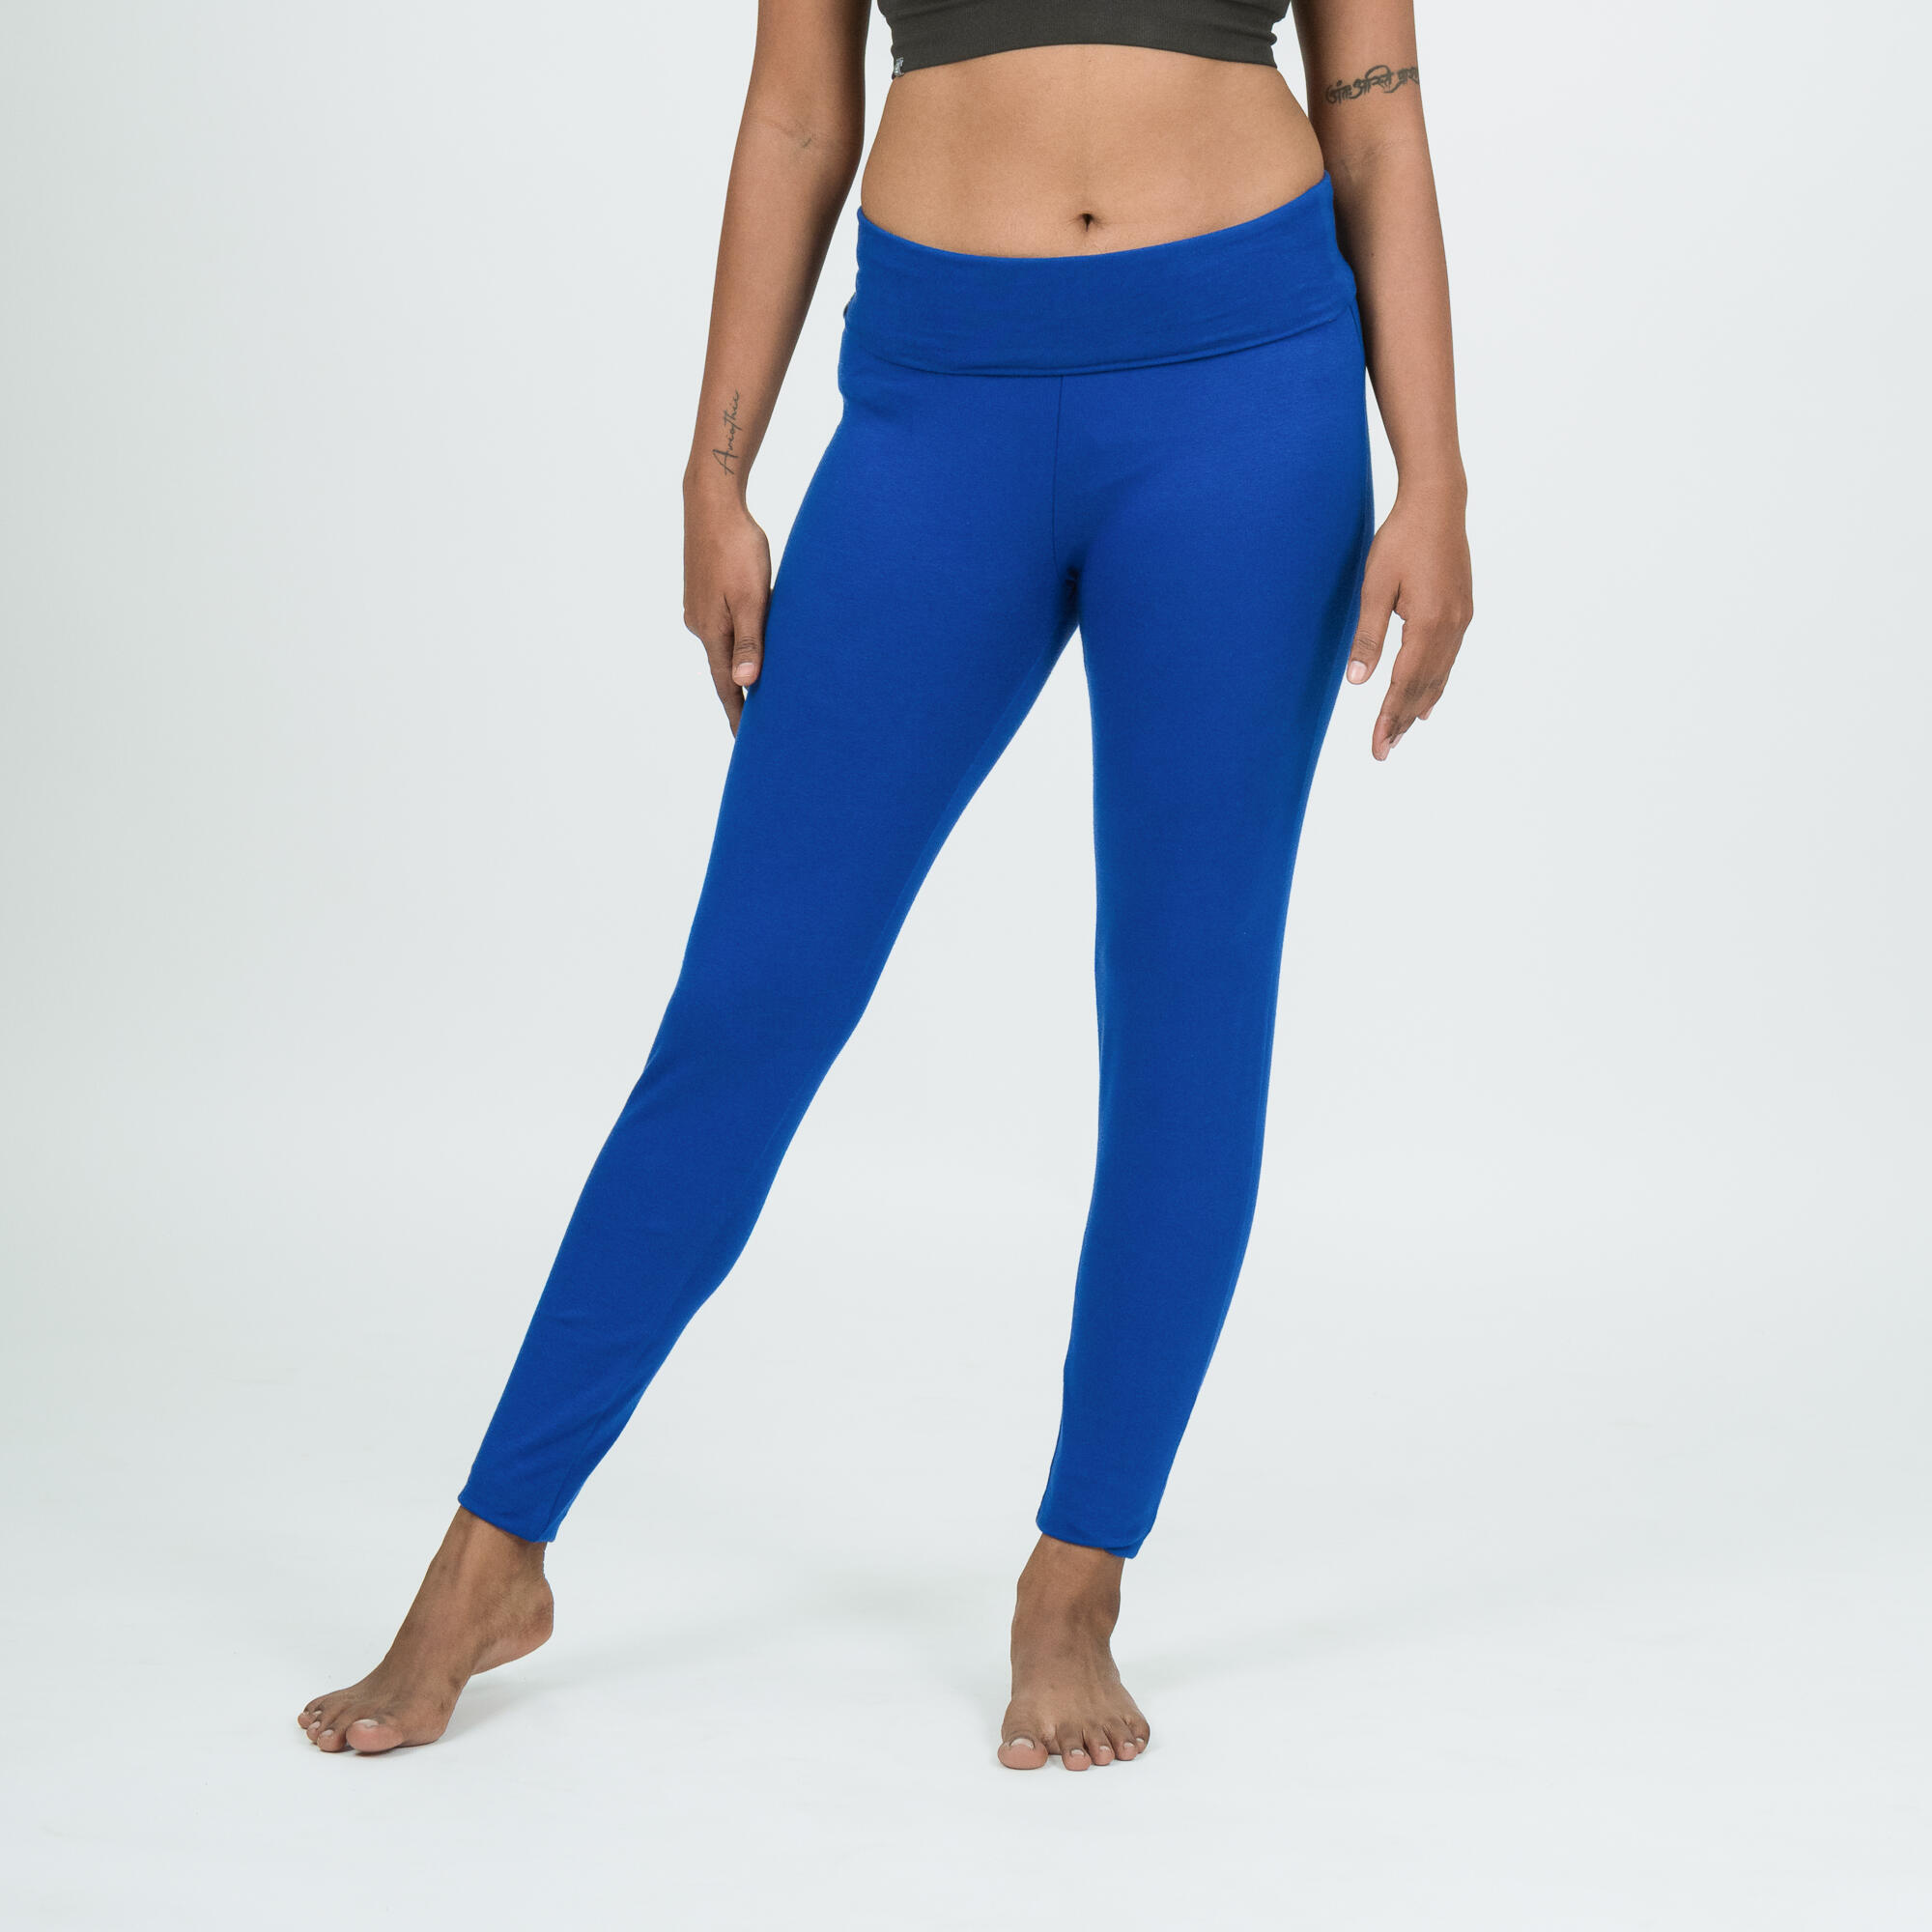 BRANDED LEGGING | Welcome to Petro Sports Online Shop